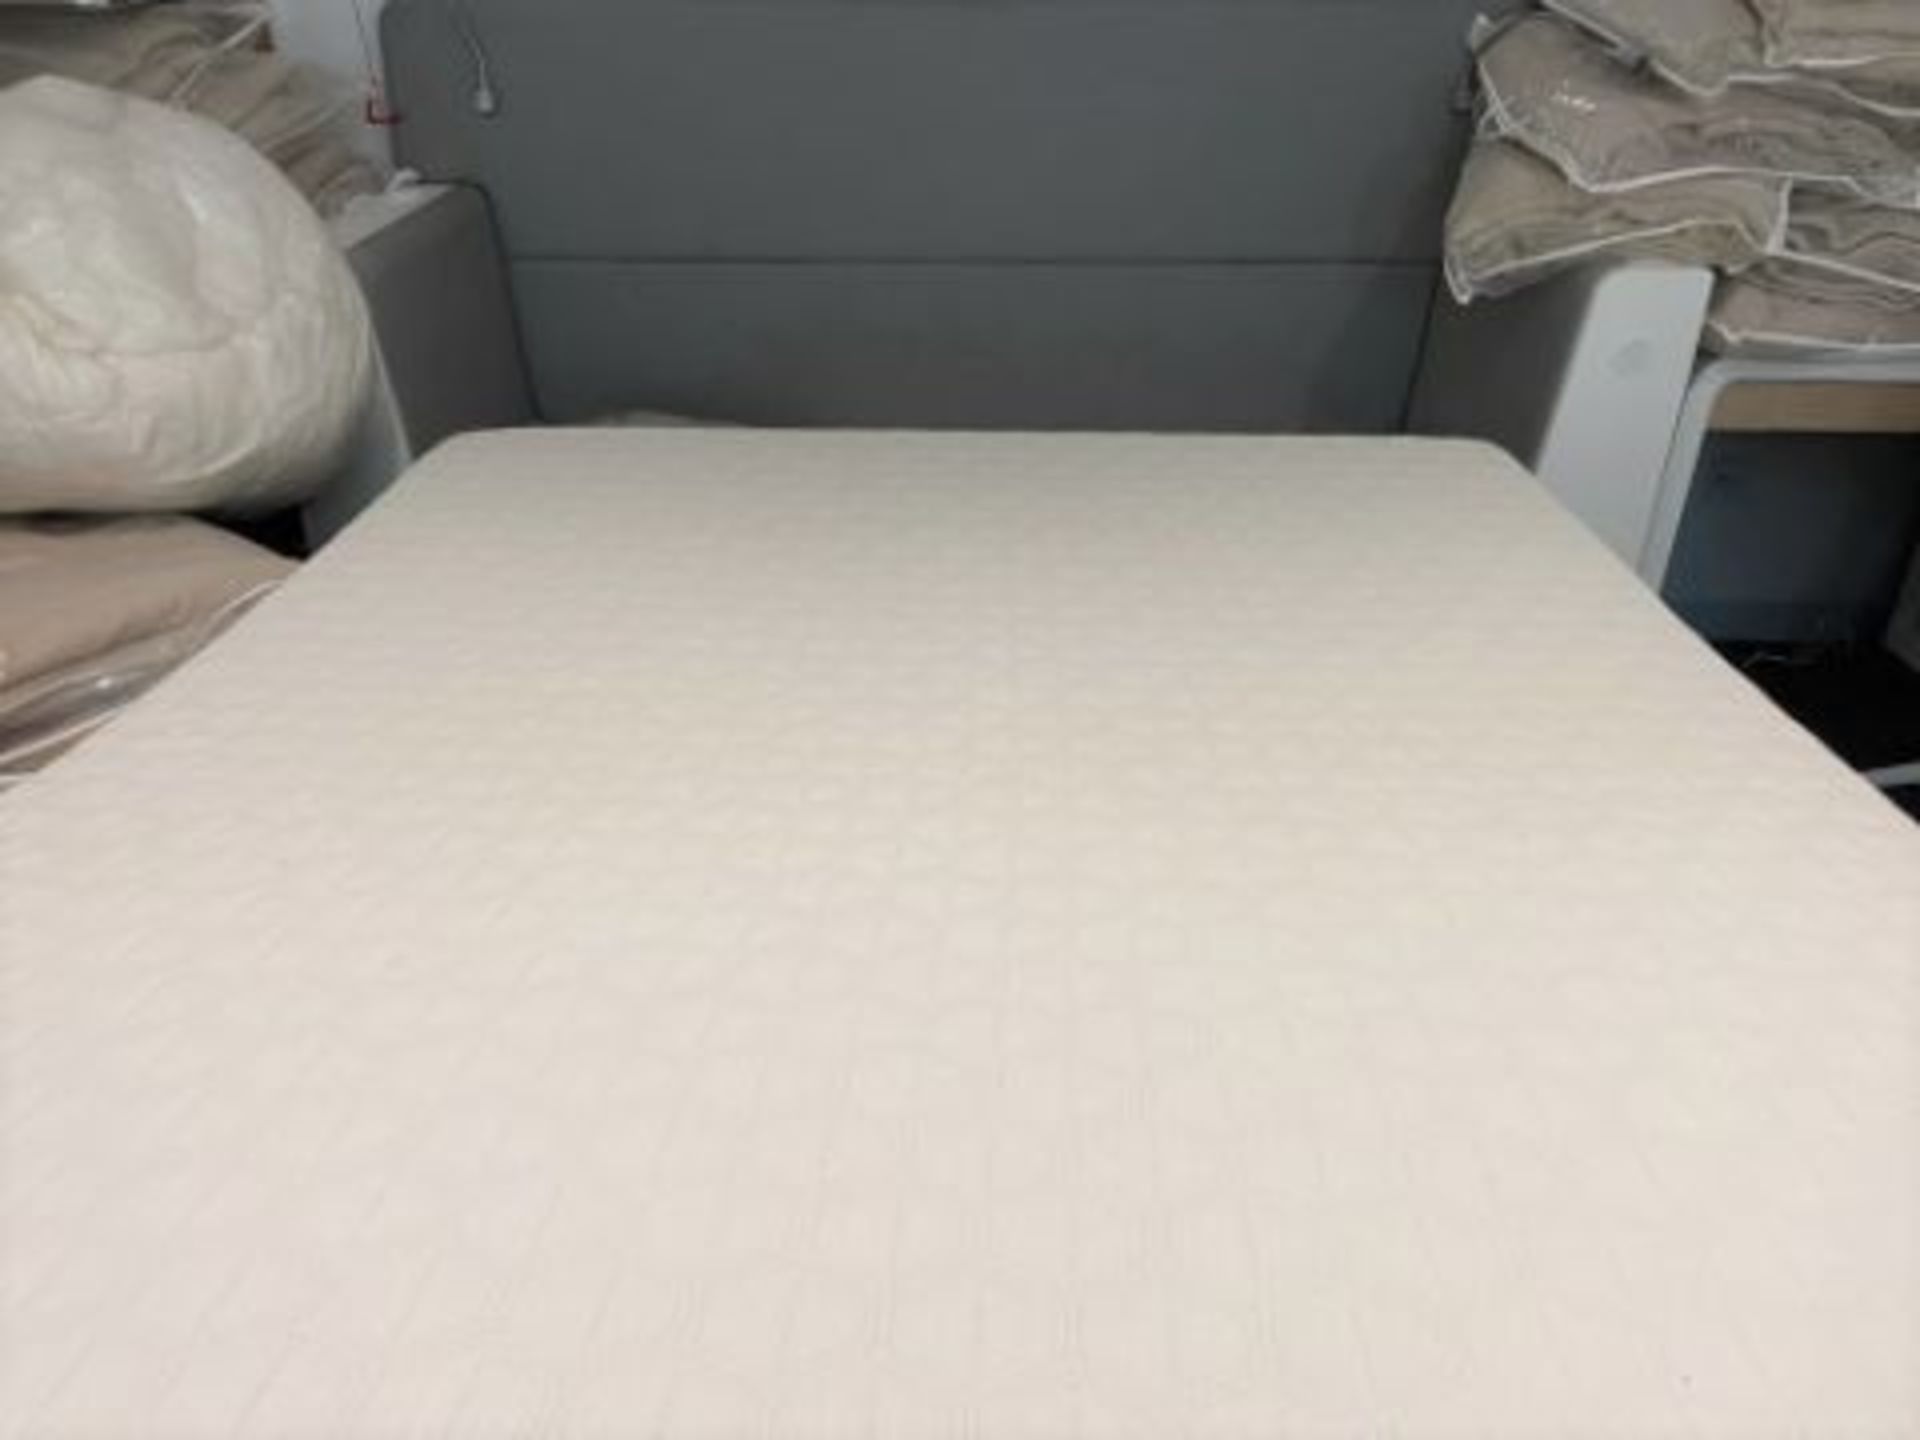 1 x Double Adjustable Space Saving Smart Bed With Serta Motion Memory Foam Mattress - Signature - Image 8 of 8